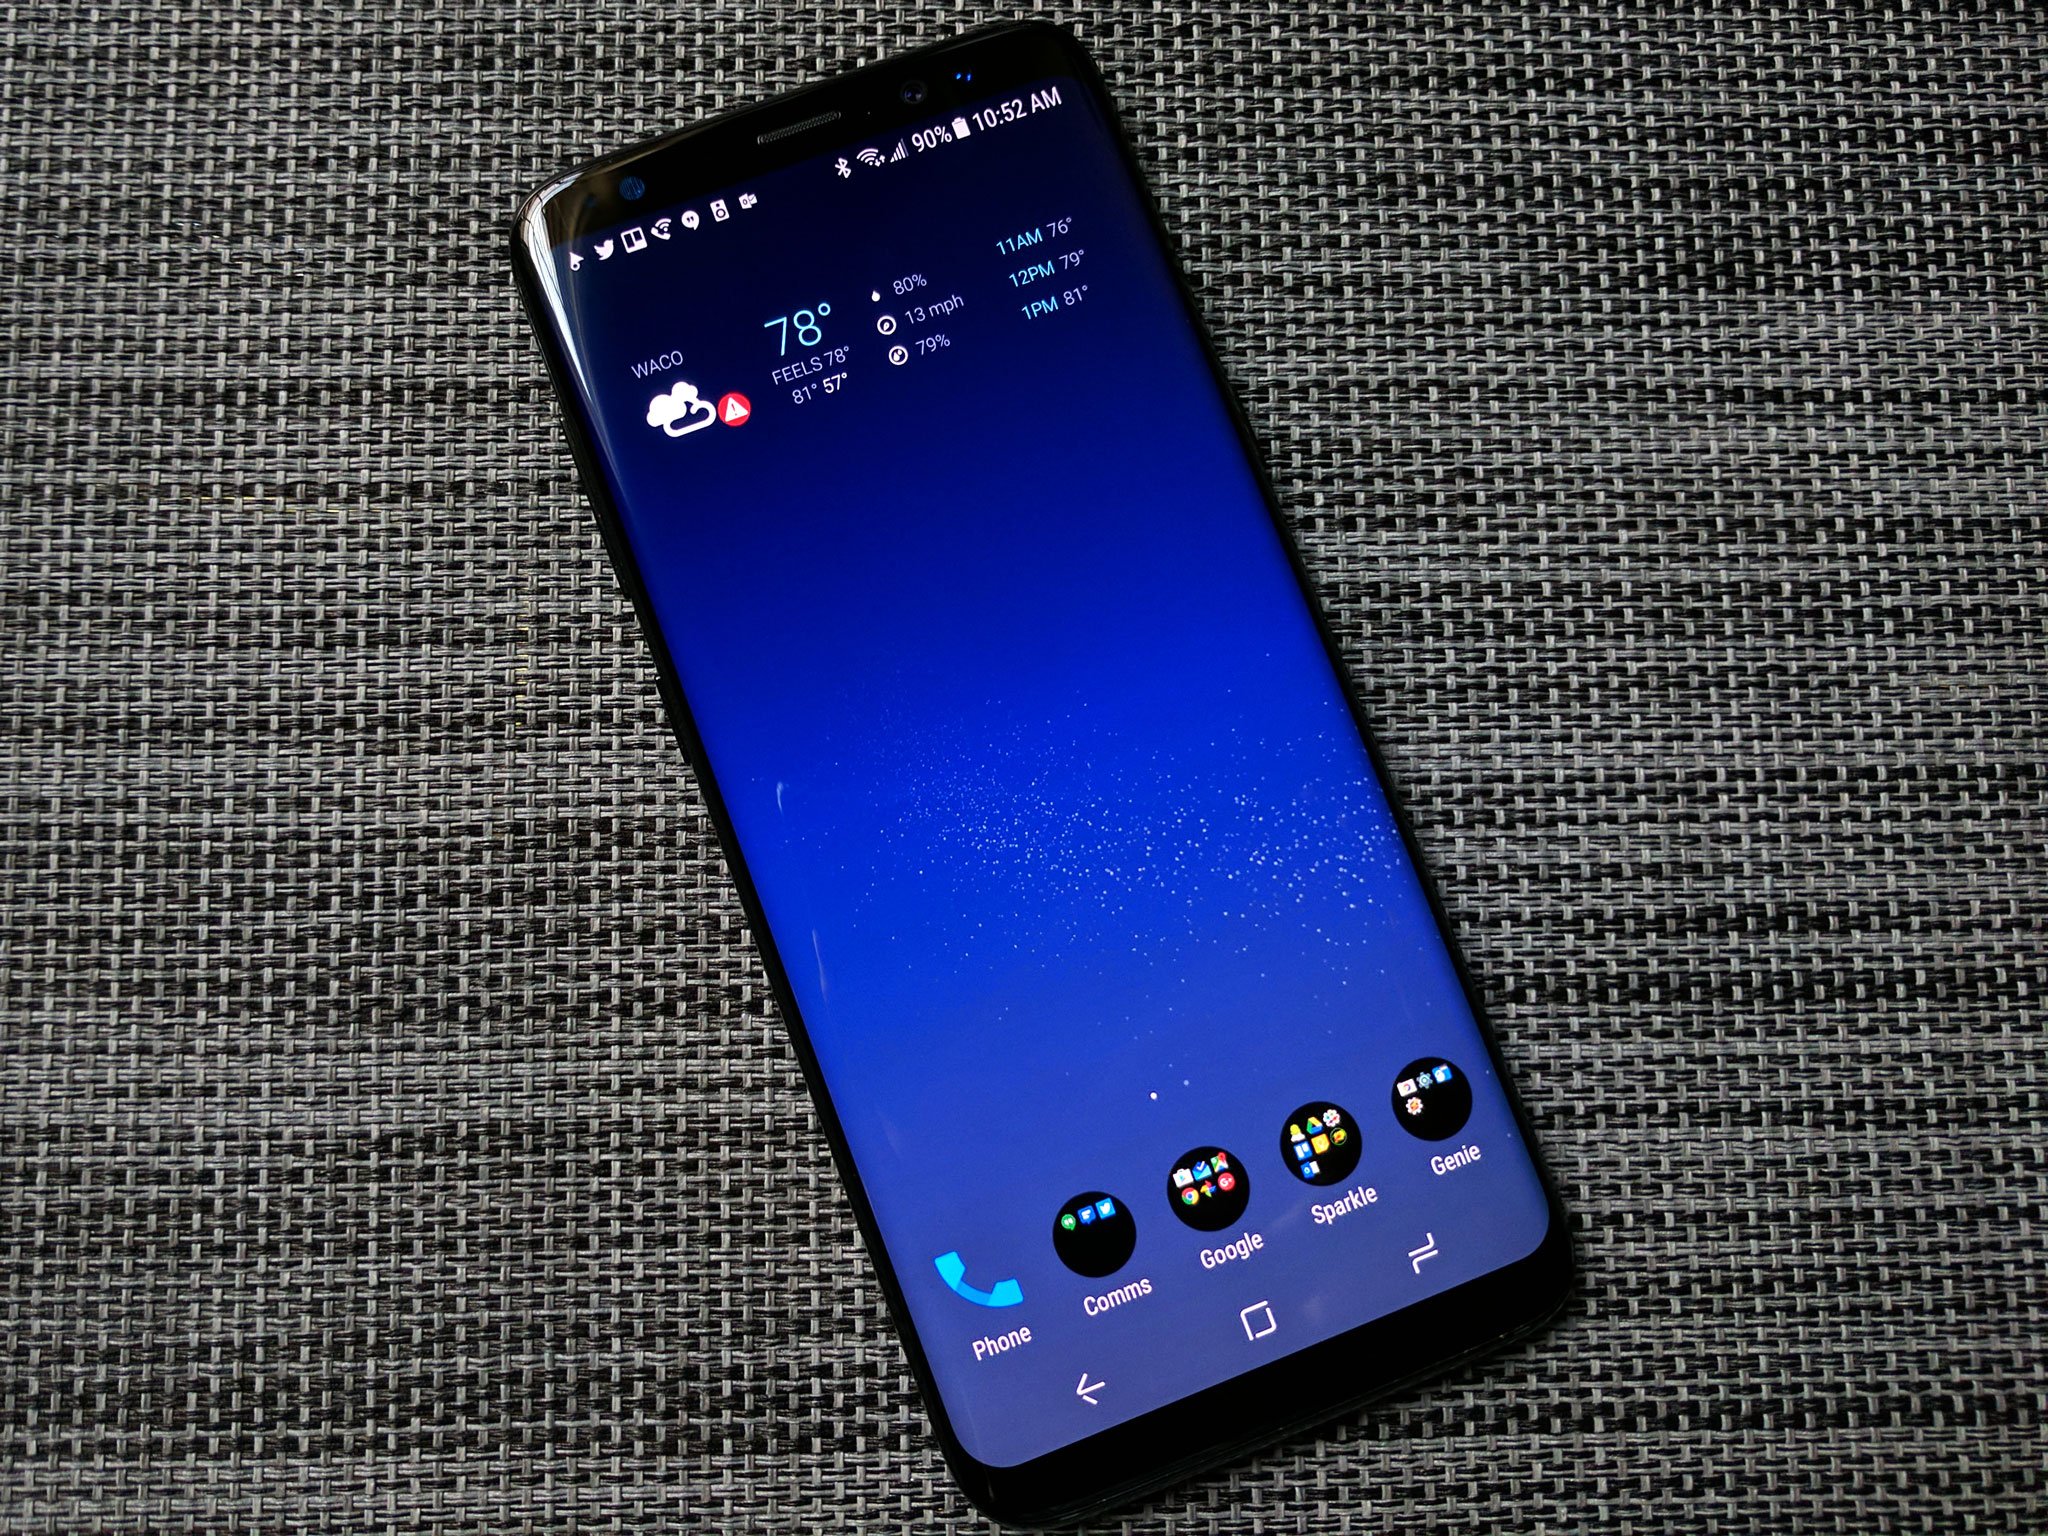 How To Theme Your Galaxy S9 Note 8 Or Galaxy S8 Android Central